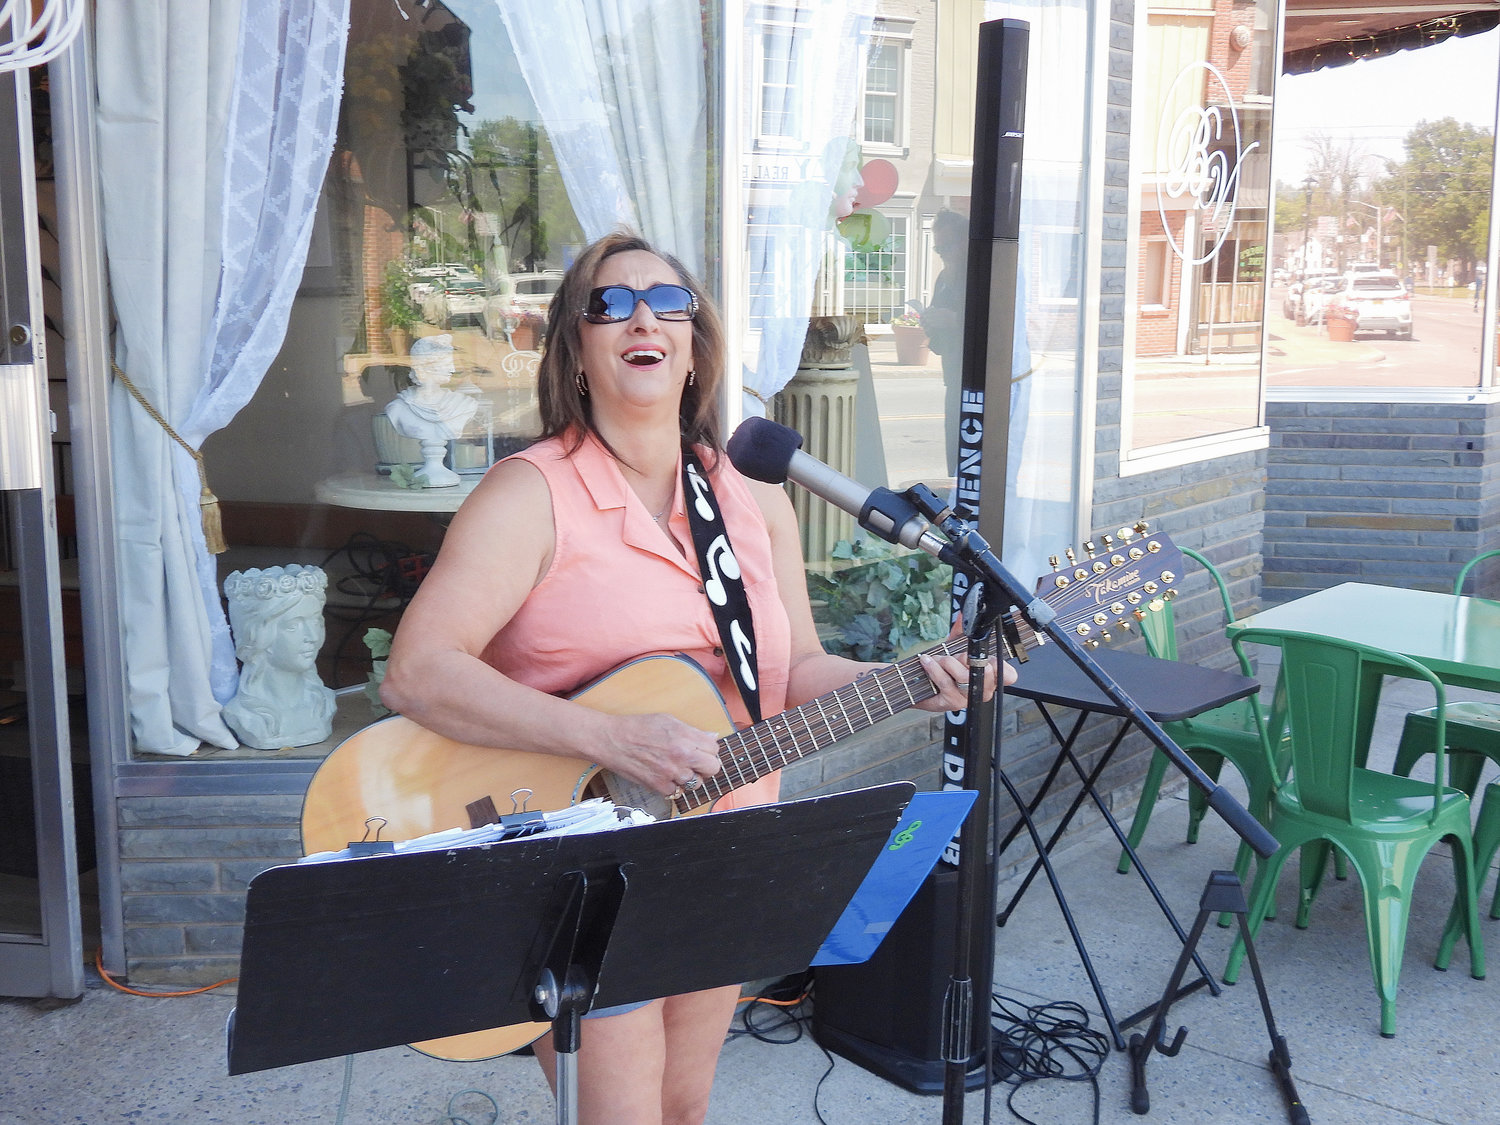 Local musician Ann Wieder plays outside Bella Vita Cafe, singing a variety of songs to the delight of visitors and passerbys.